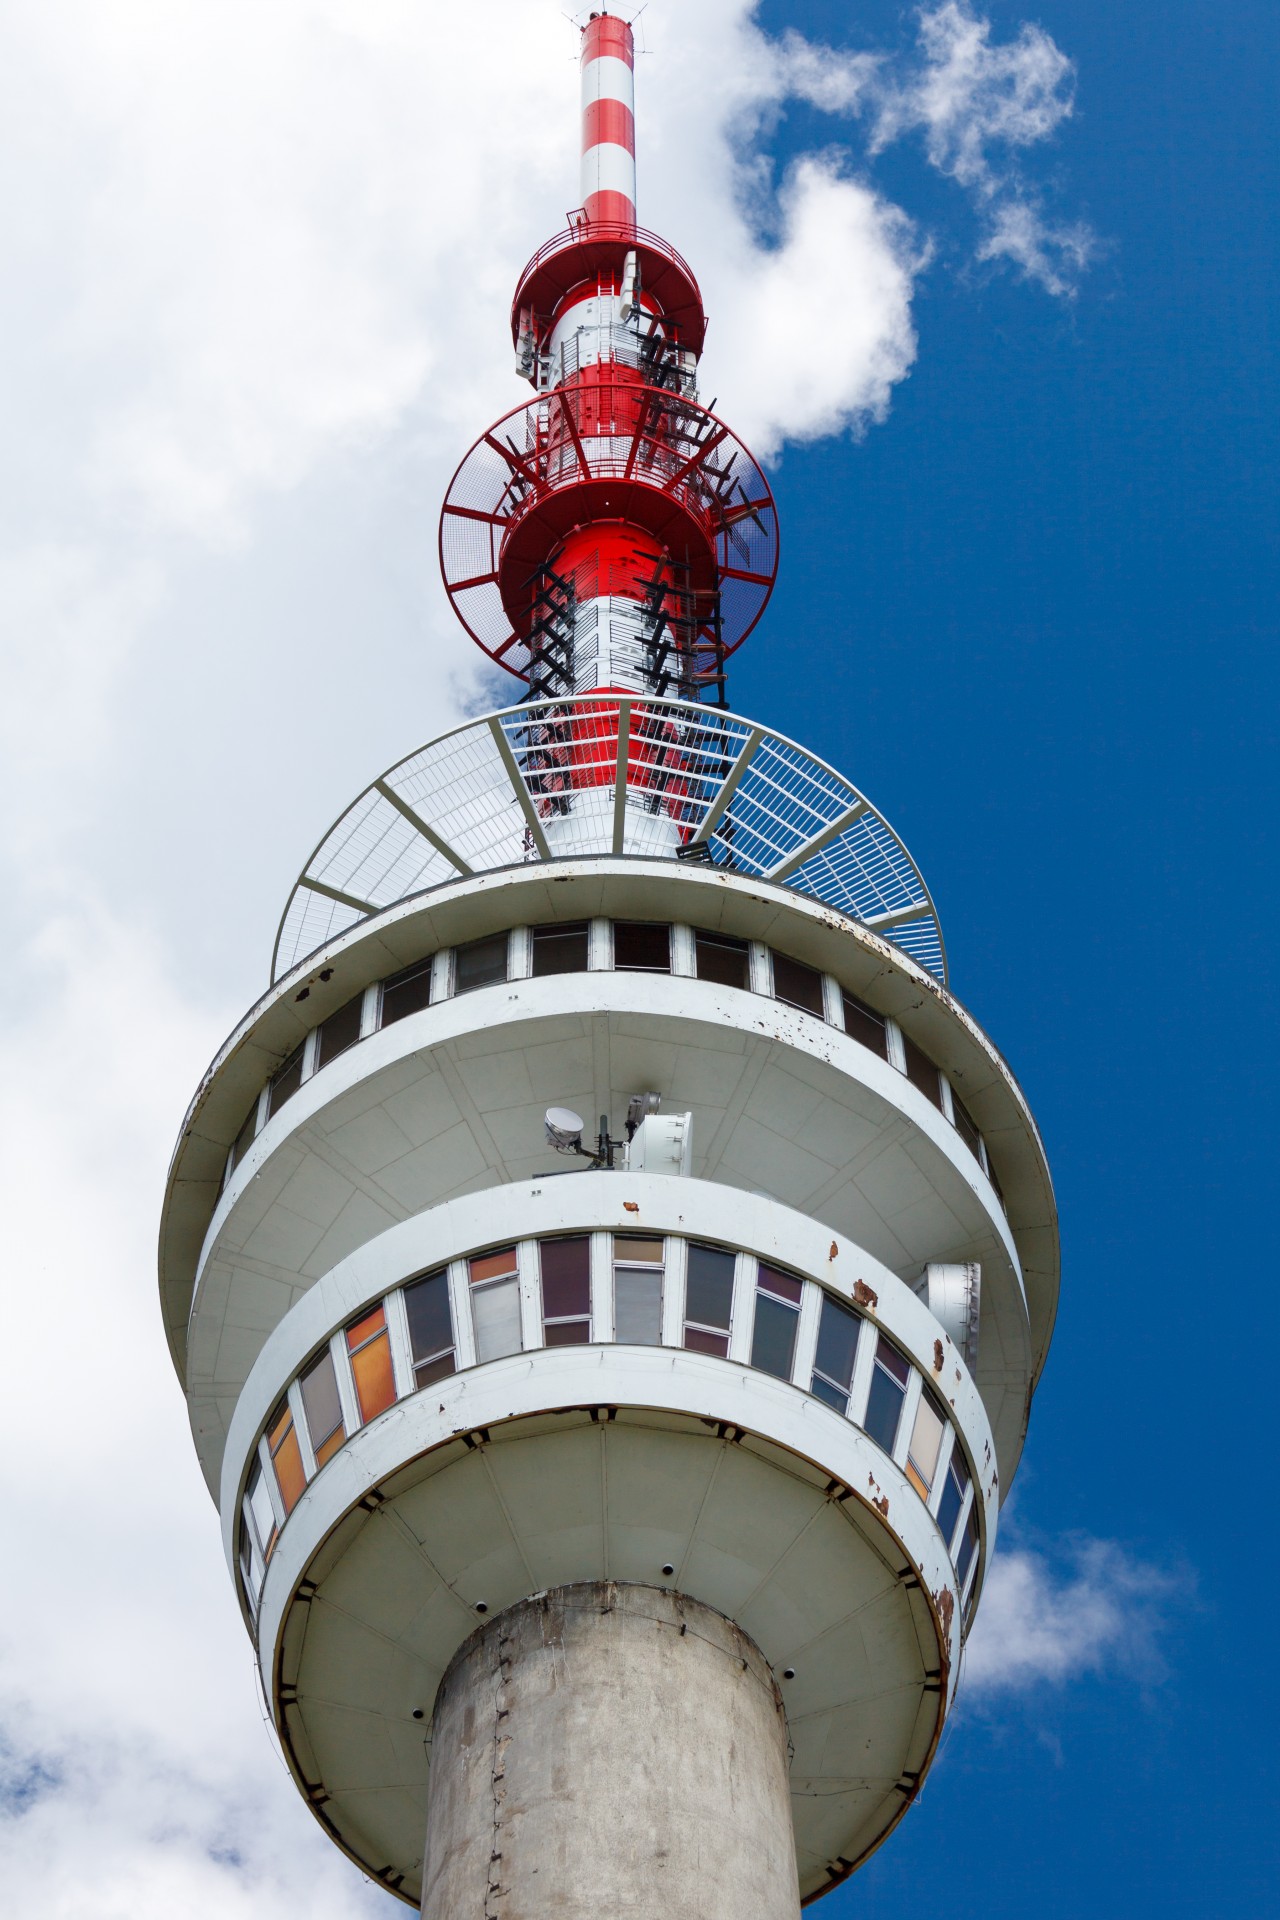 A detail of a broadcasting TV tower with sky in the background